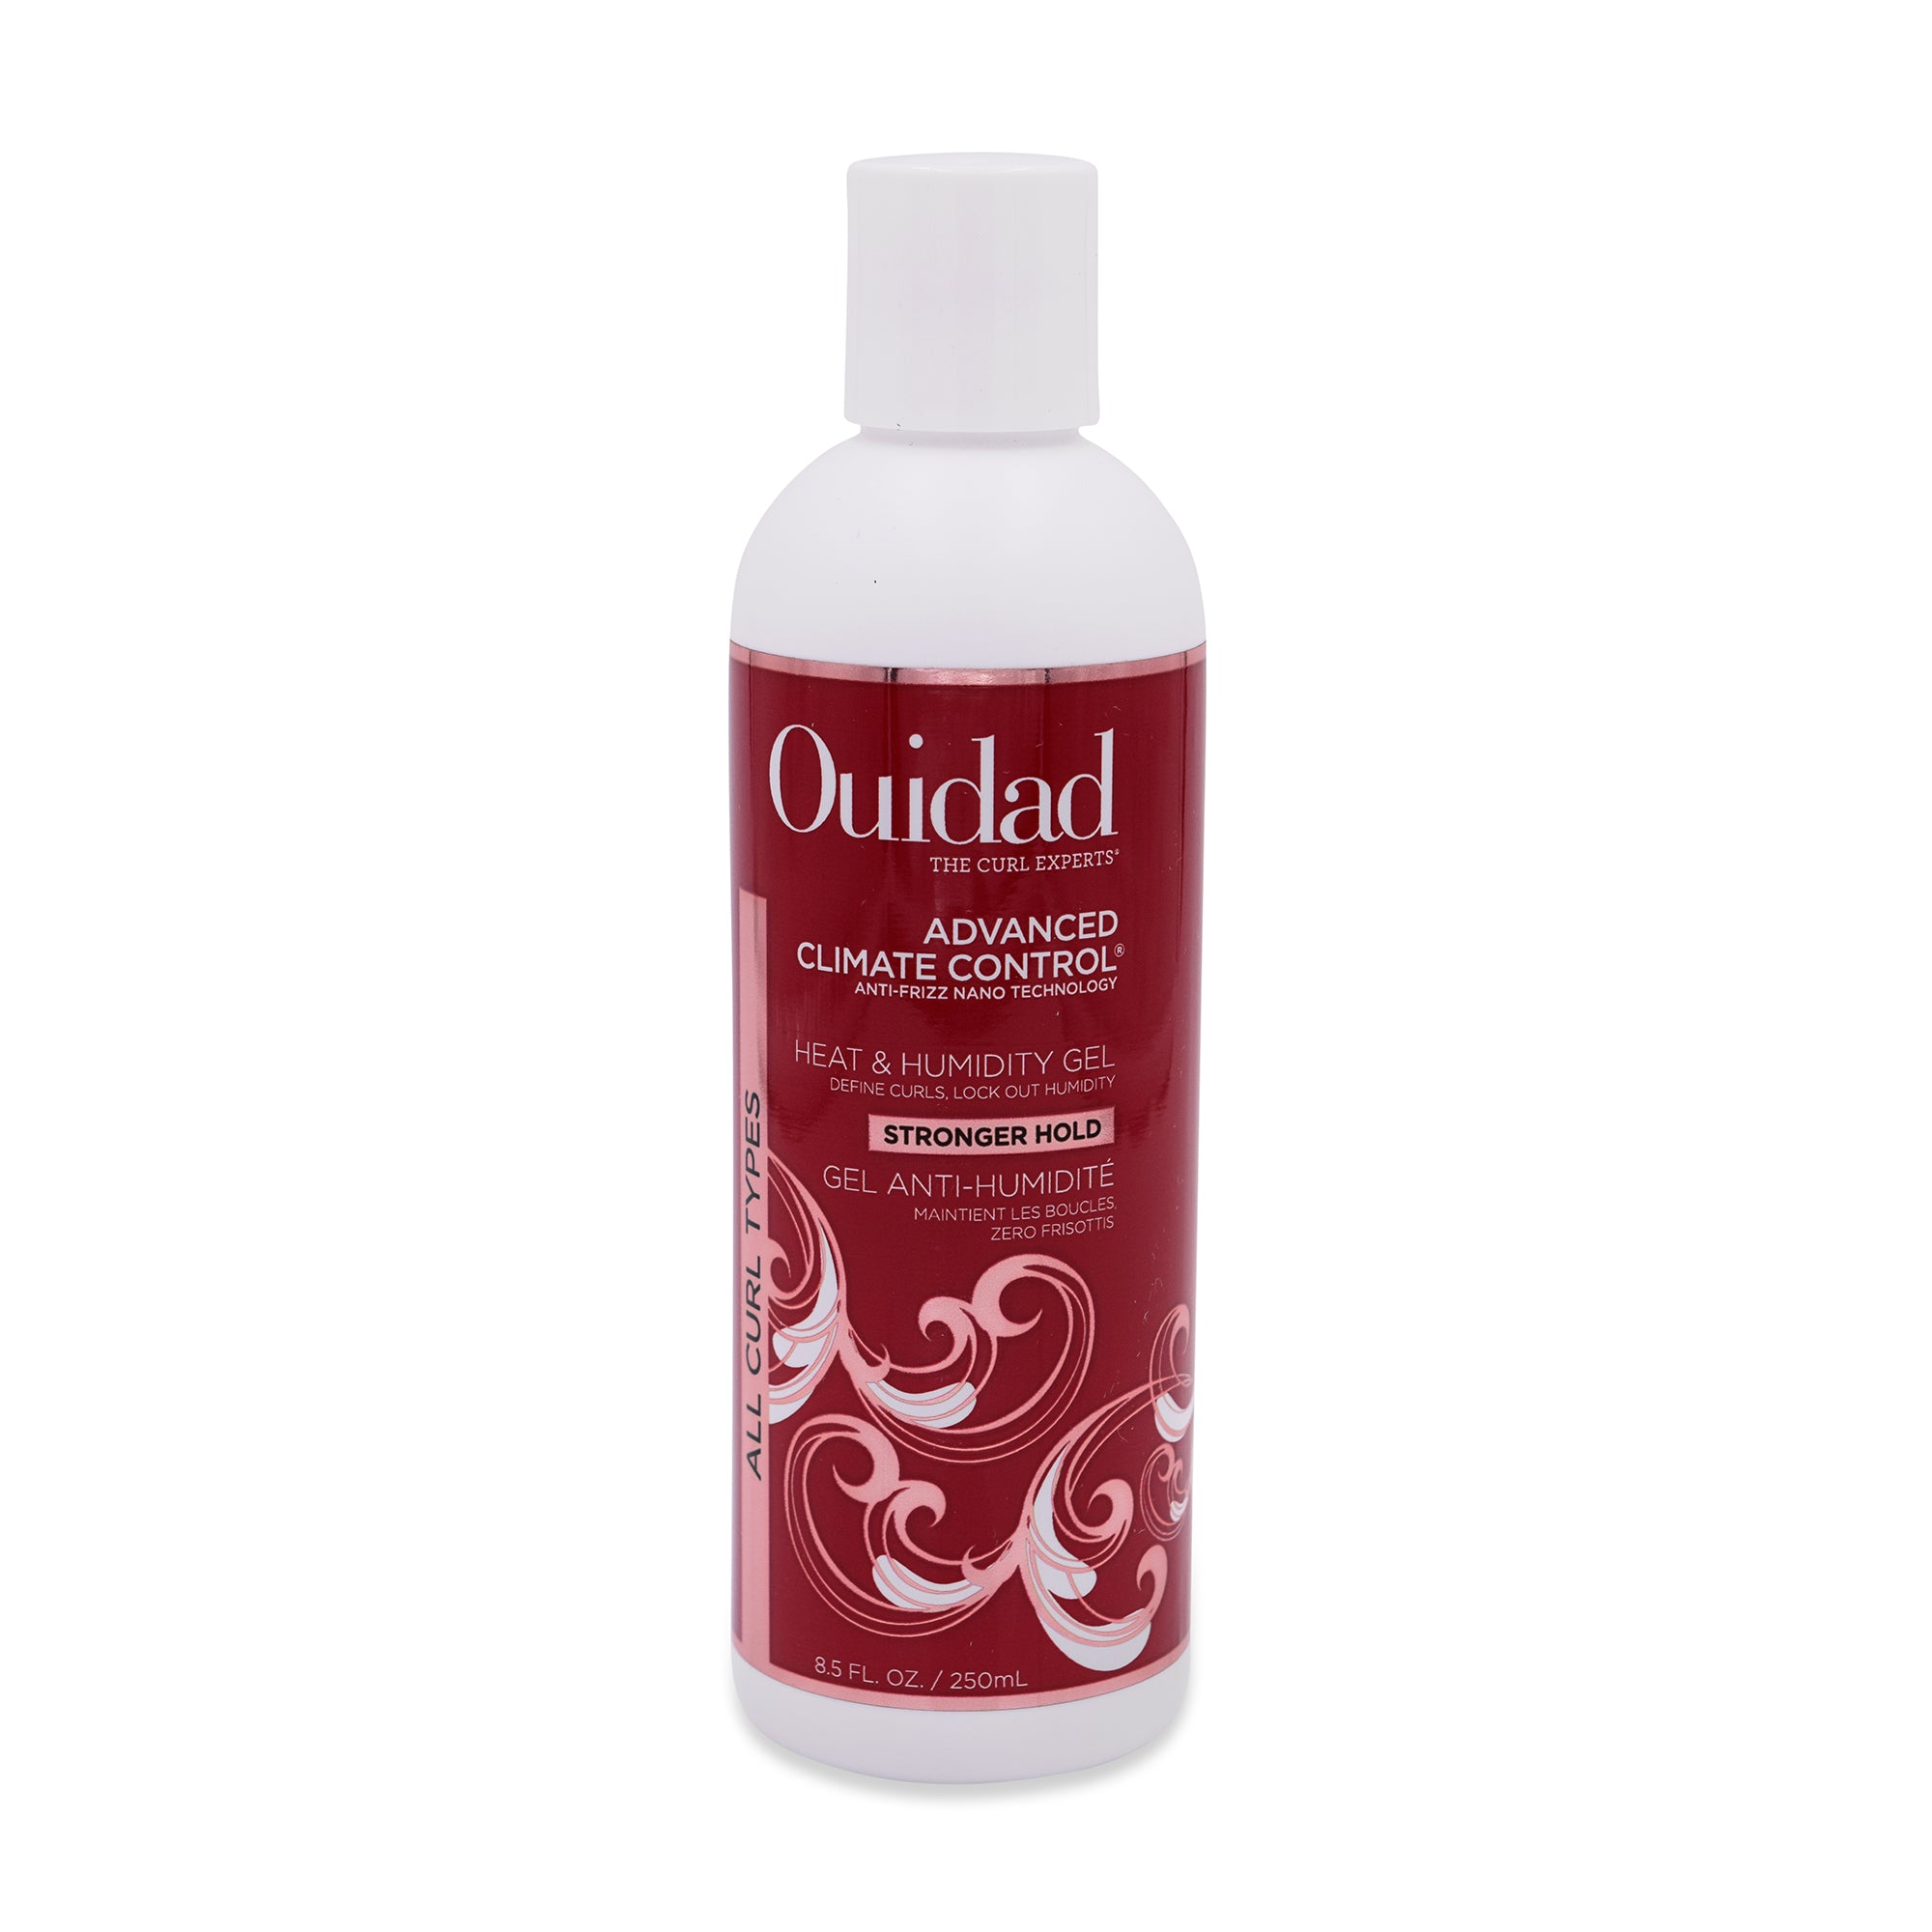 Ouidad Advanced Climate Control® Heat & Humidity Gel – Stronger Hold (Buy 3 Get 1 Free Mix & Match)